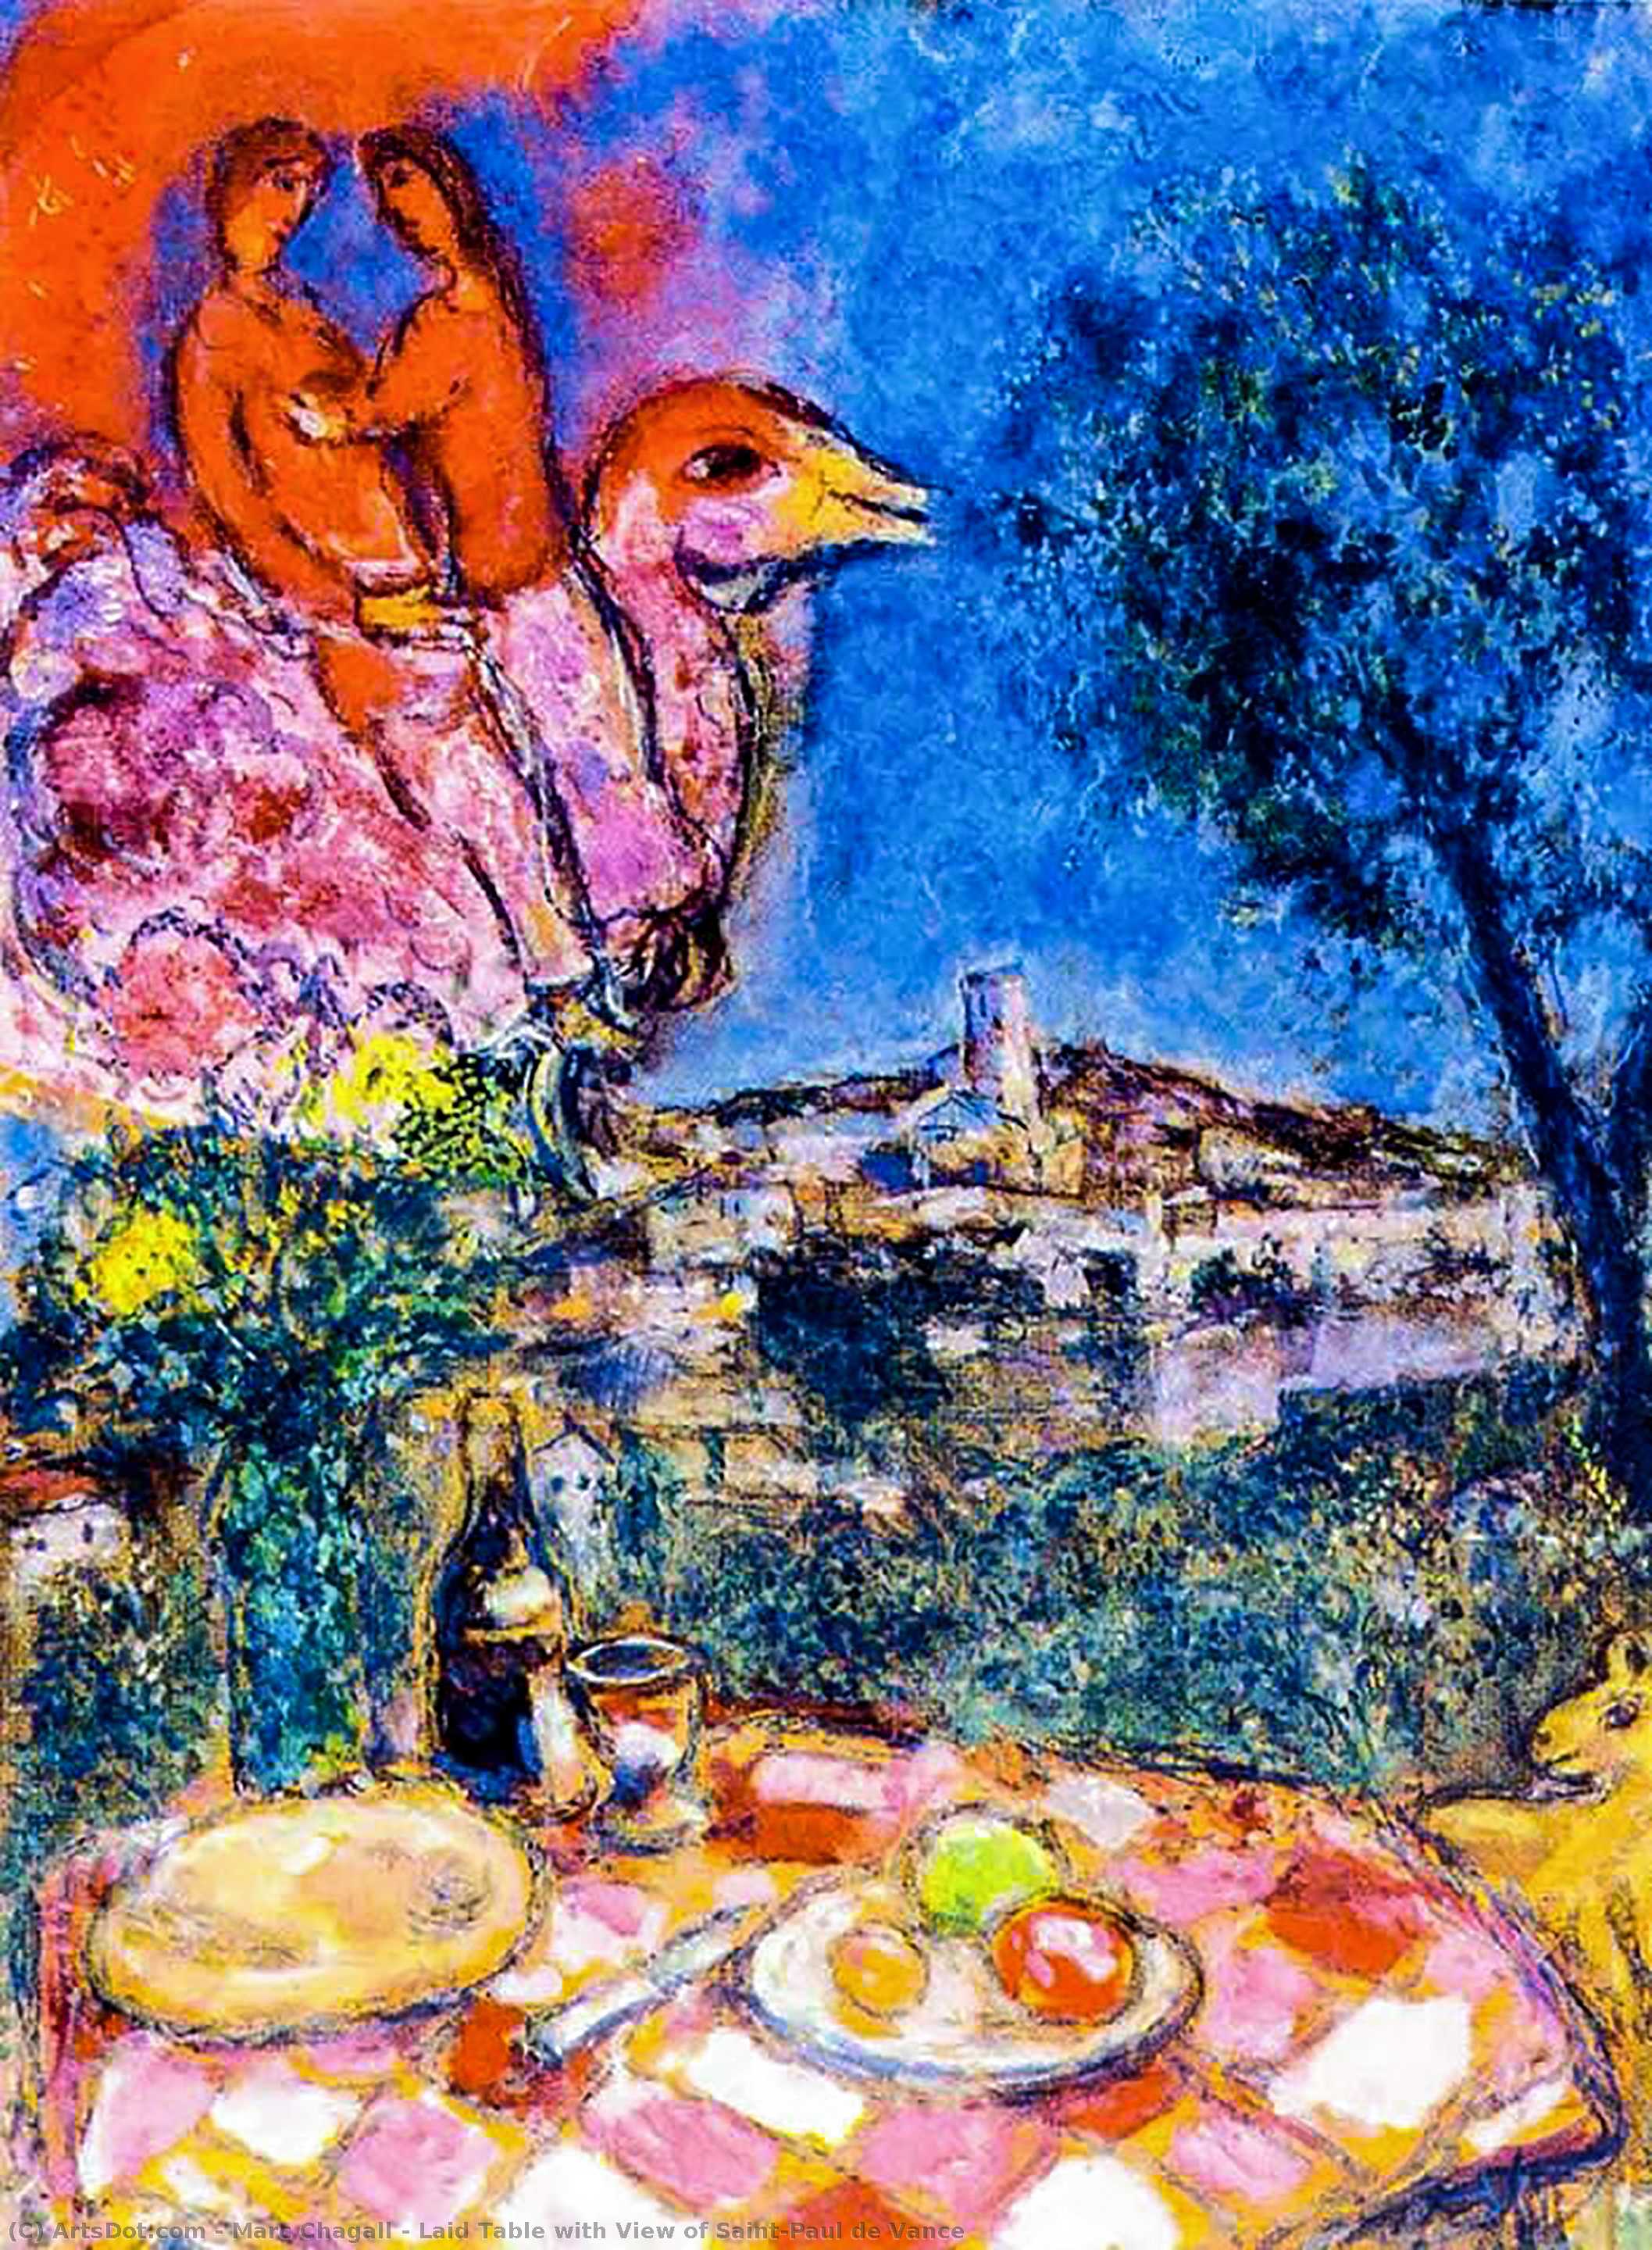 WikiOO.org - Encyclopedia of Fine Arts - Lukisan, Artwork Marc Chagall - Laid Table with View of Saint-Paul de Vance